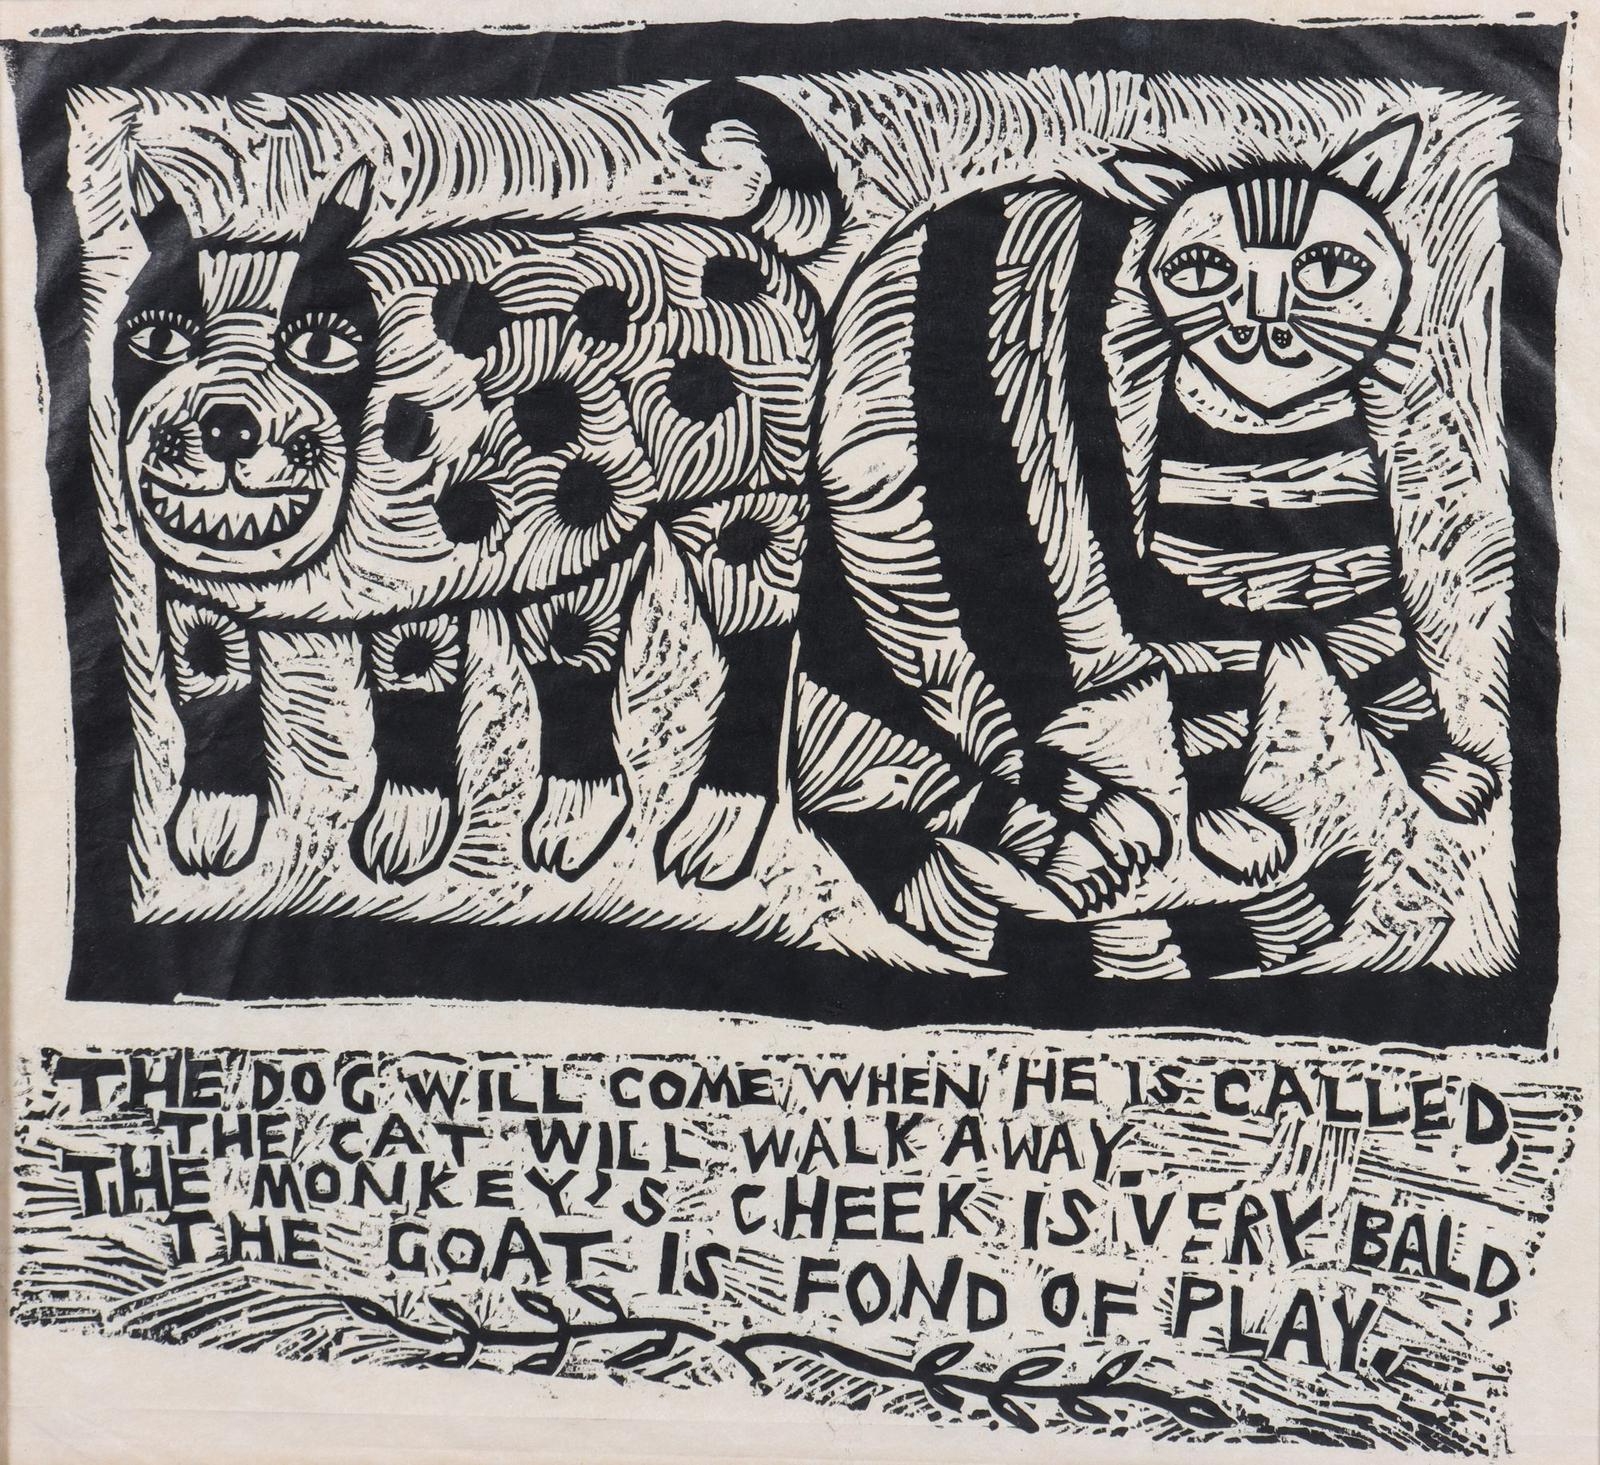 Artwork by Barbara Hanrahan, The Dog Will Come When He is Called, Made of Linocut (Early)